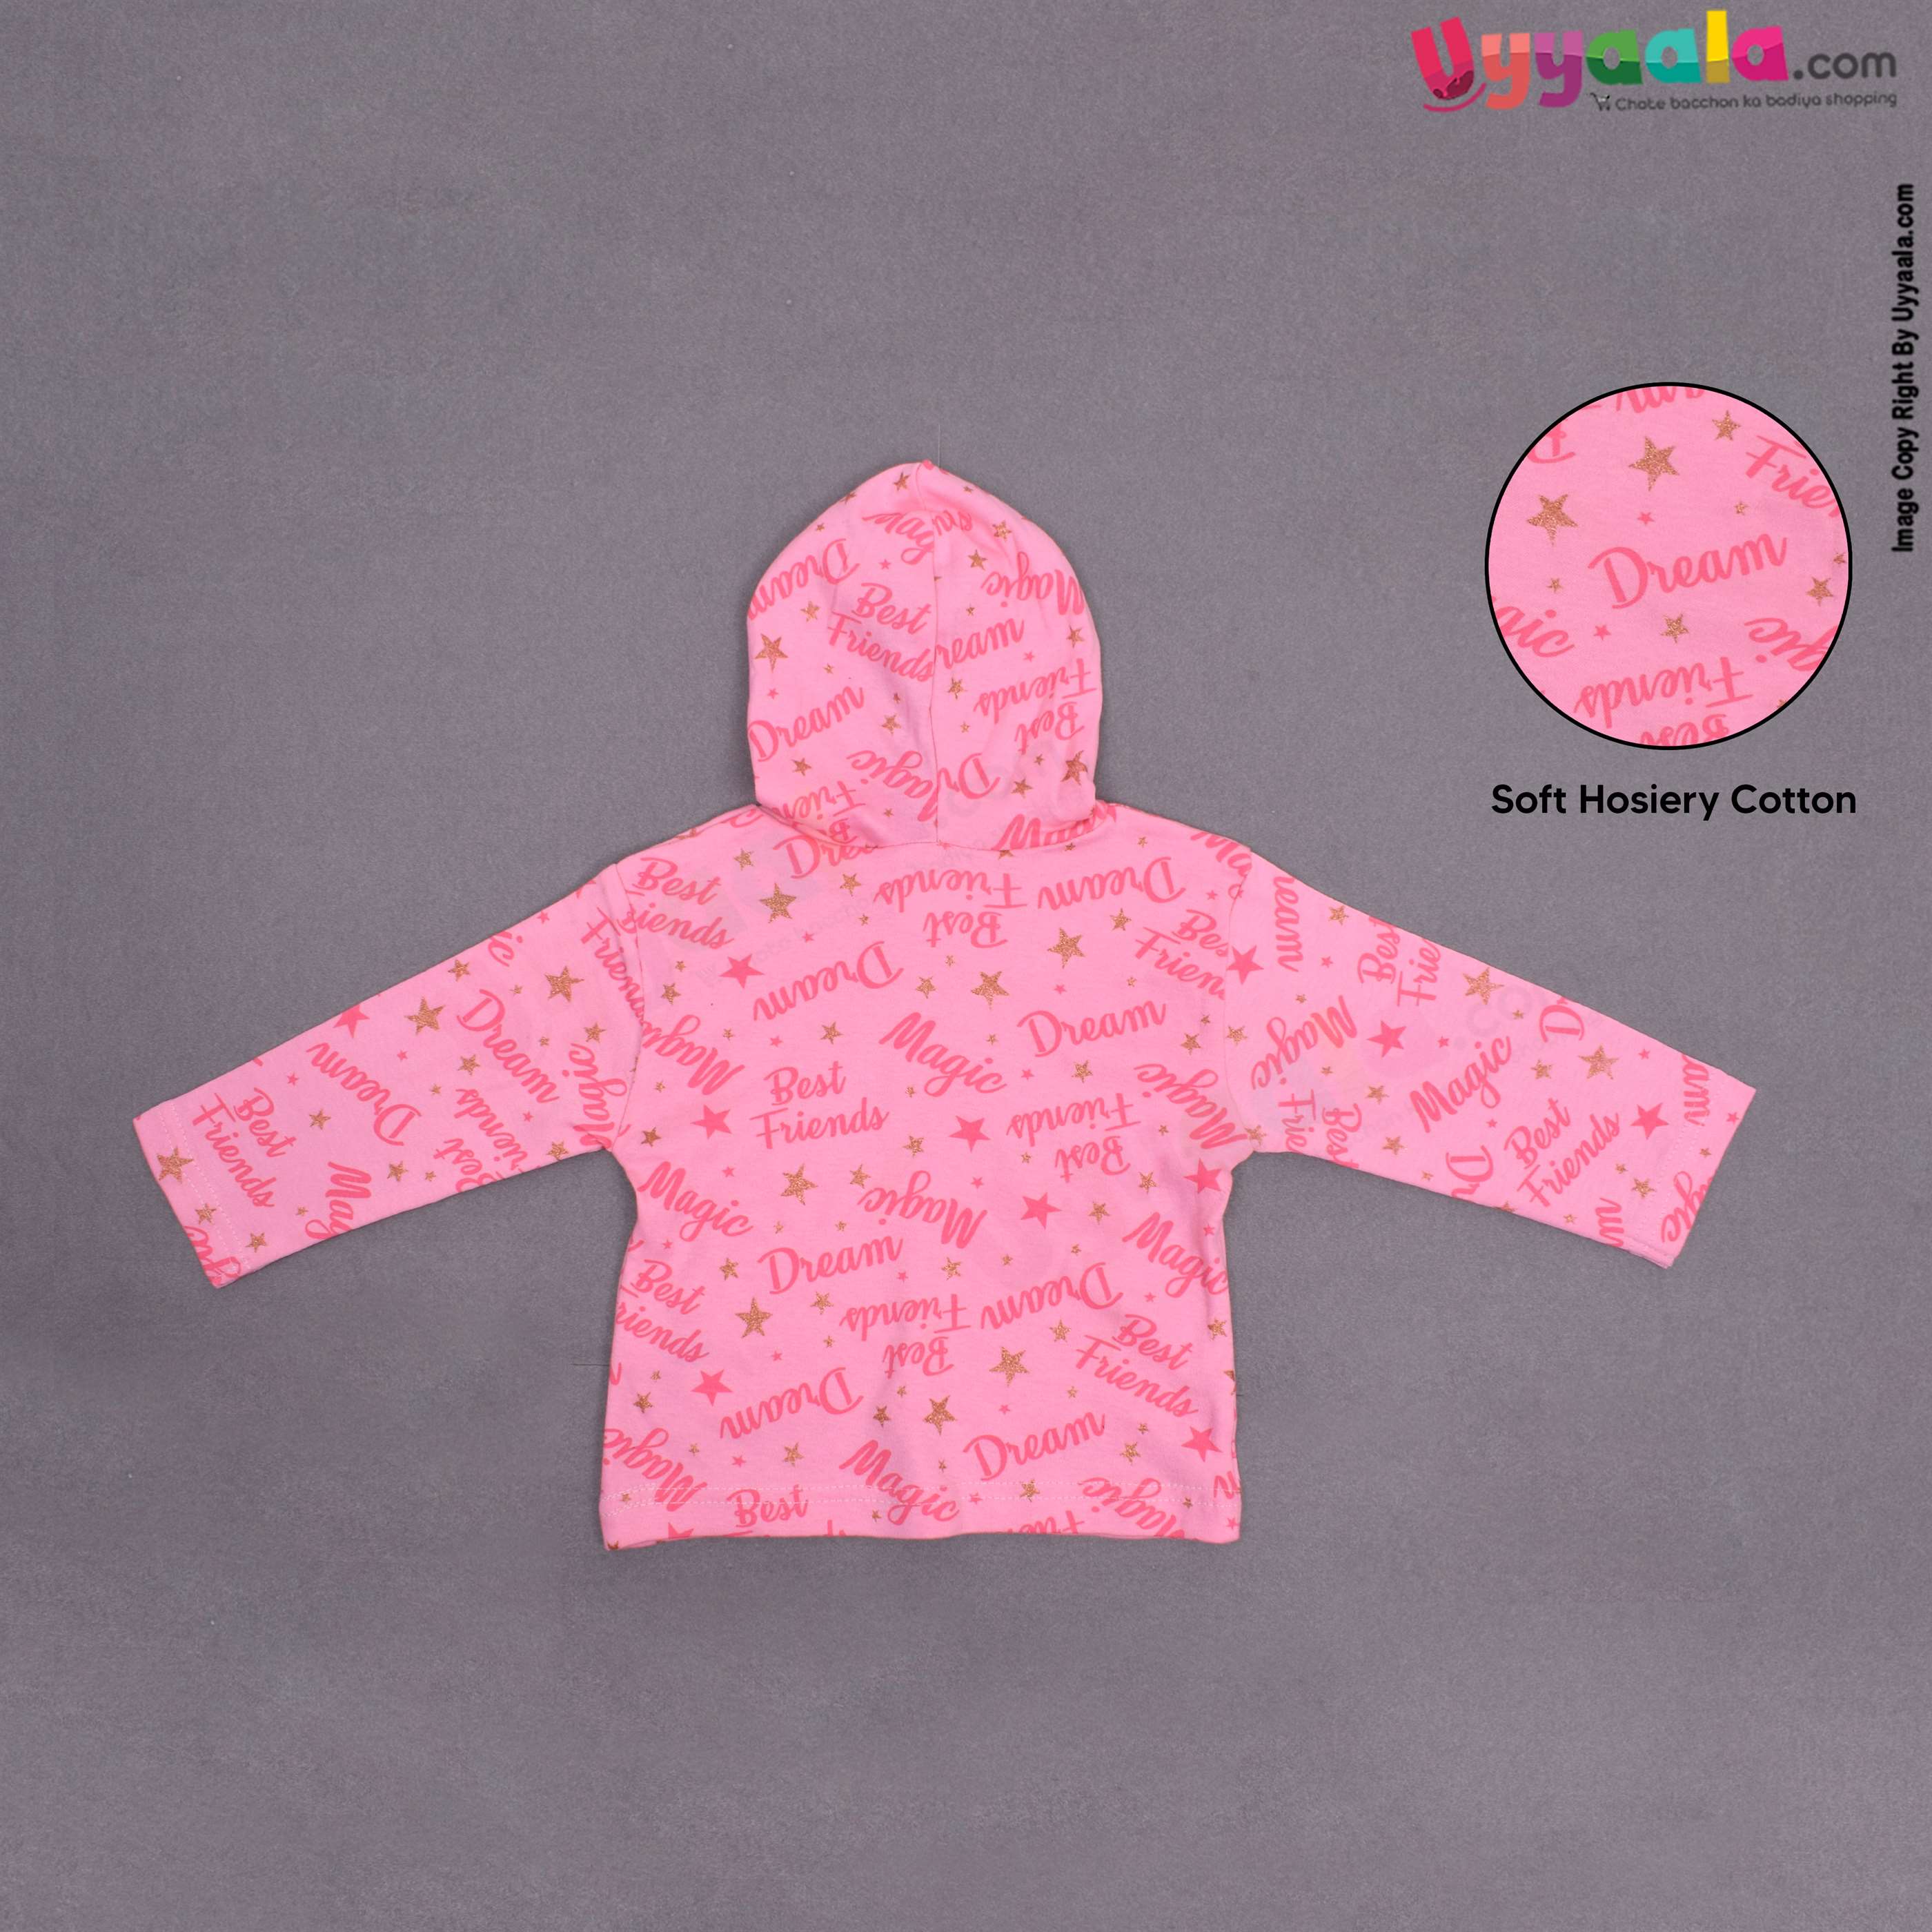 PRECIOUS Full sleeves hoodies t - shirt, cotton - pink with text & glittering star print